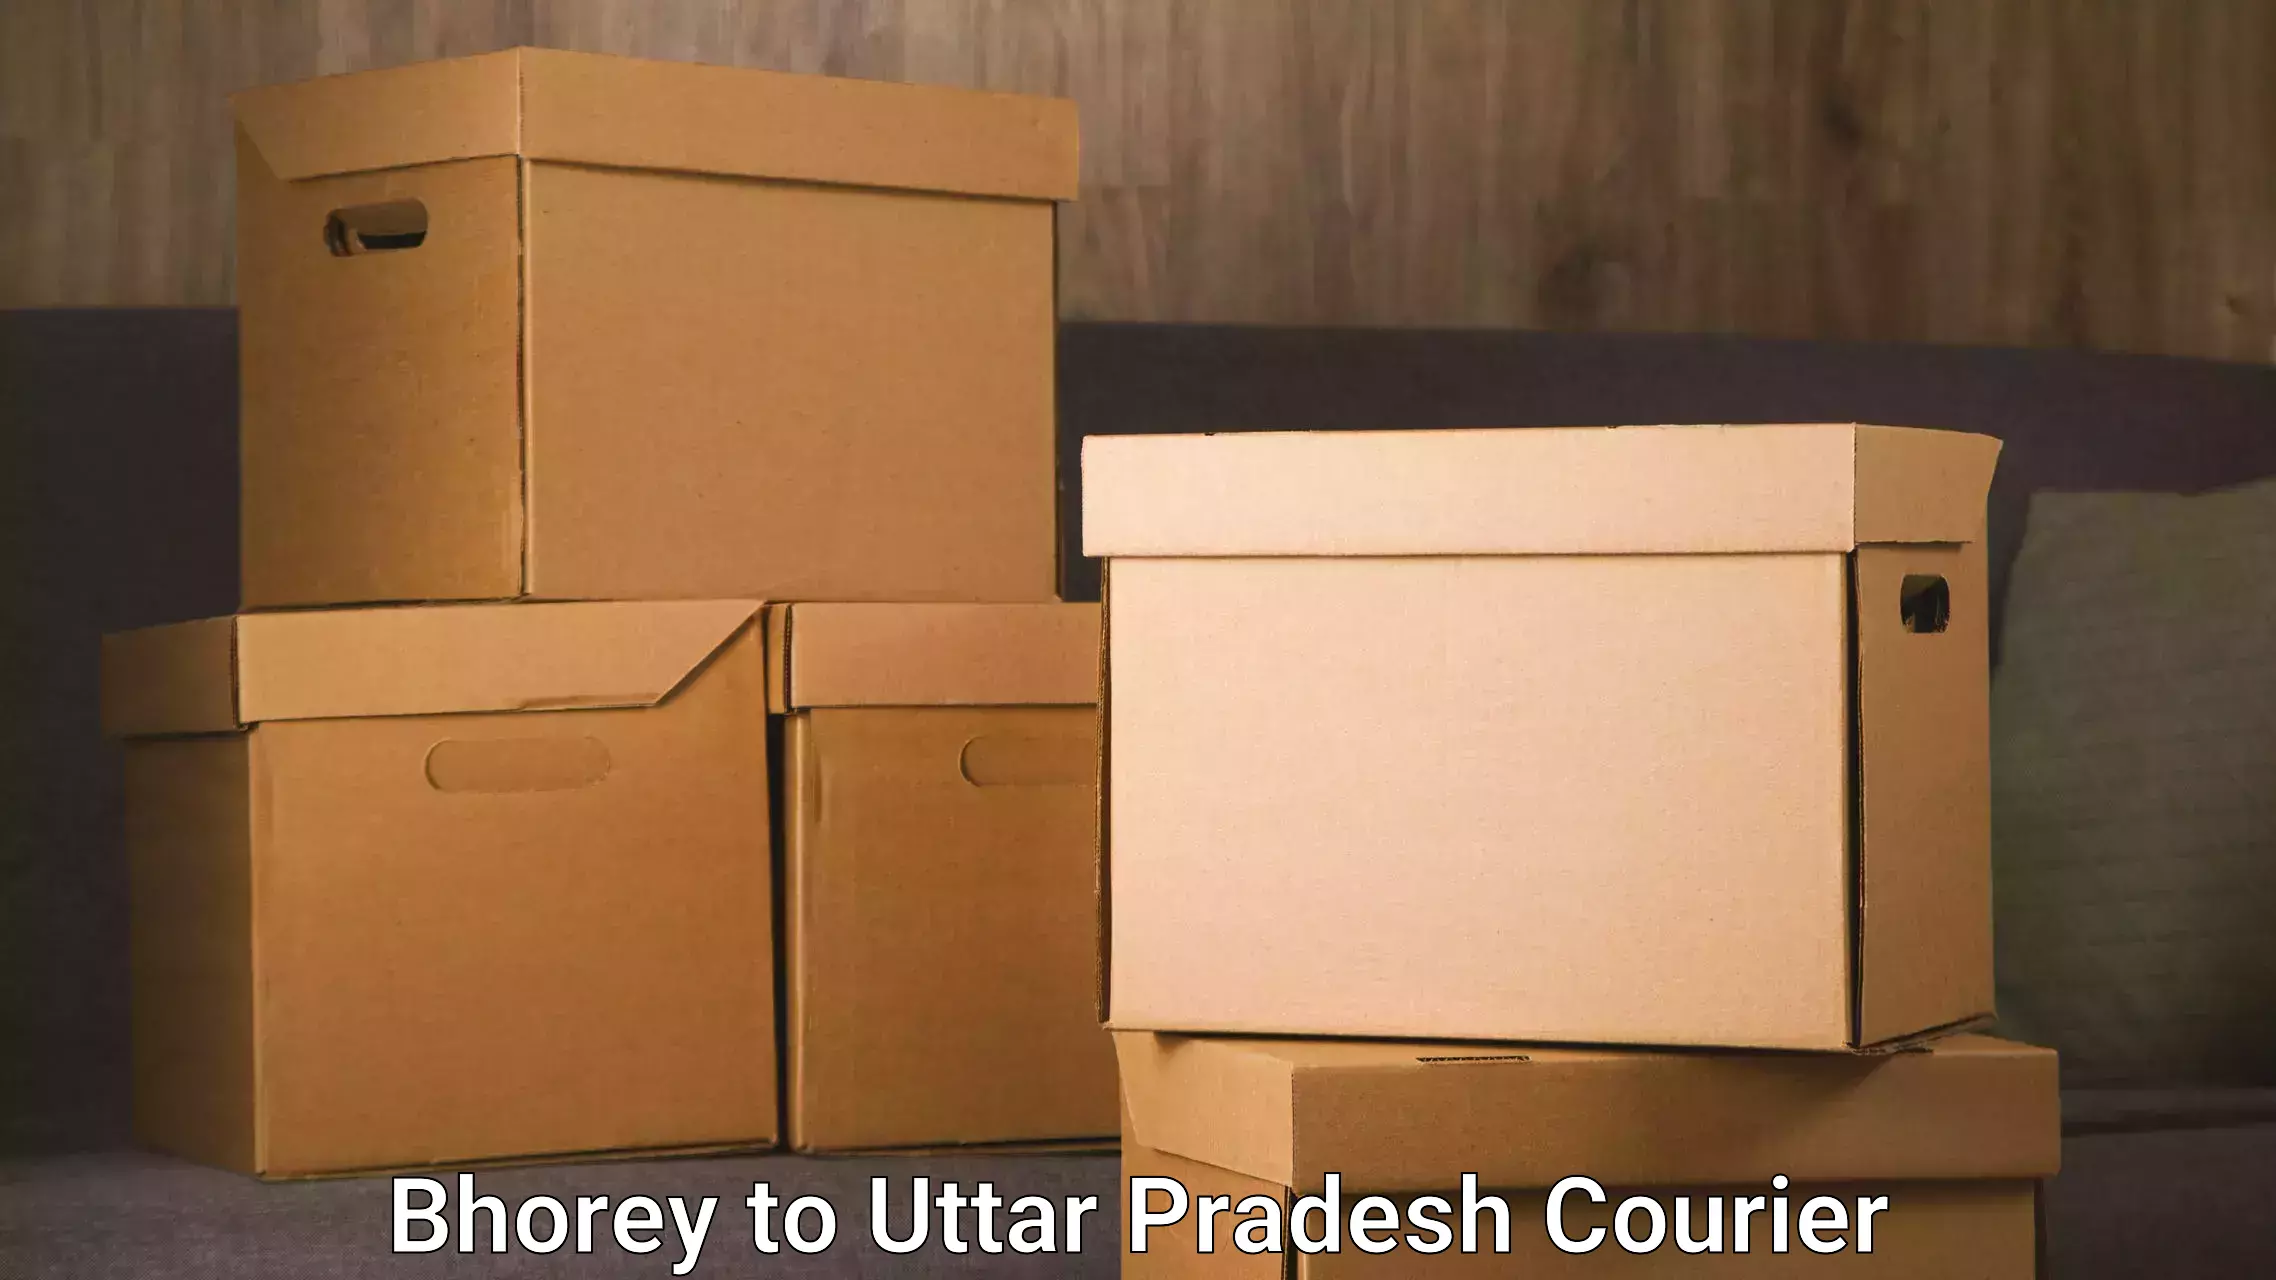 Trusted moving company Bhorey to Aligarh